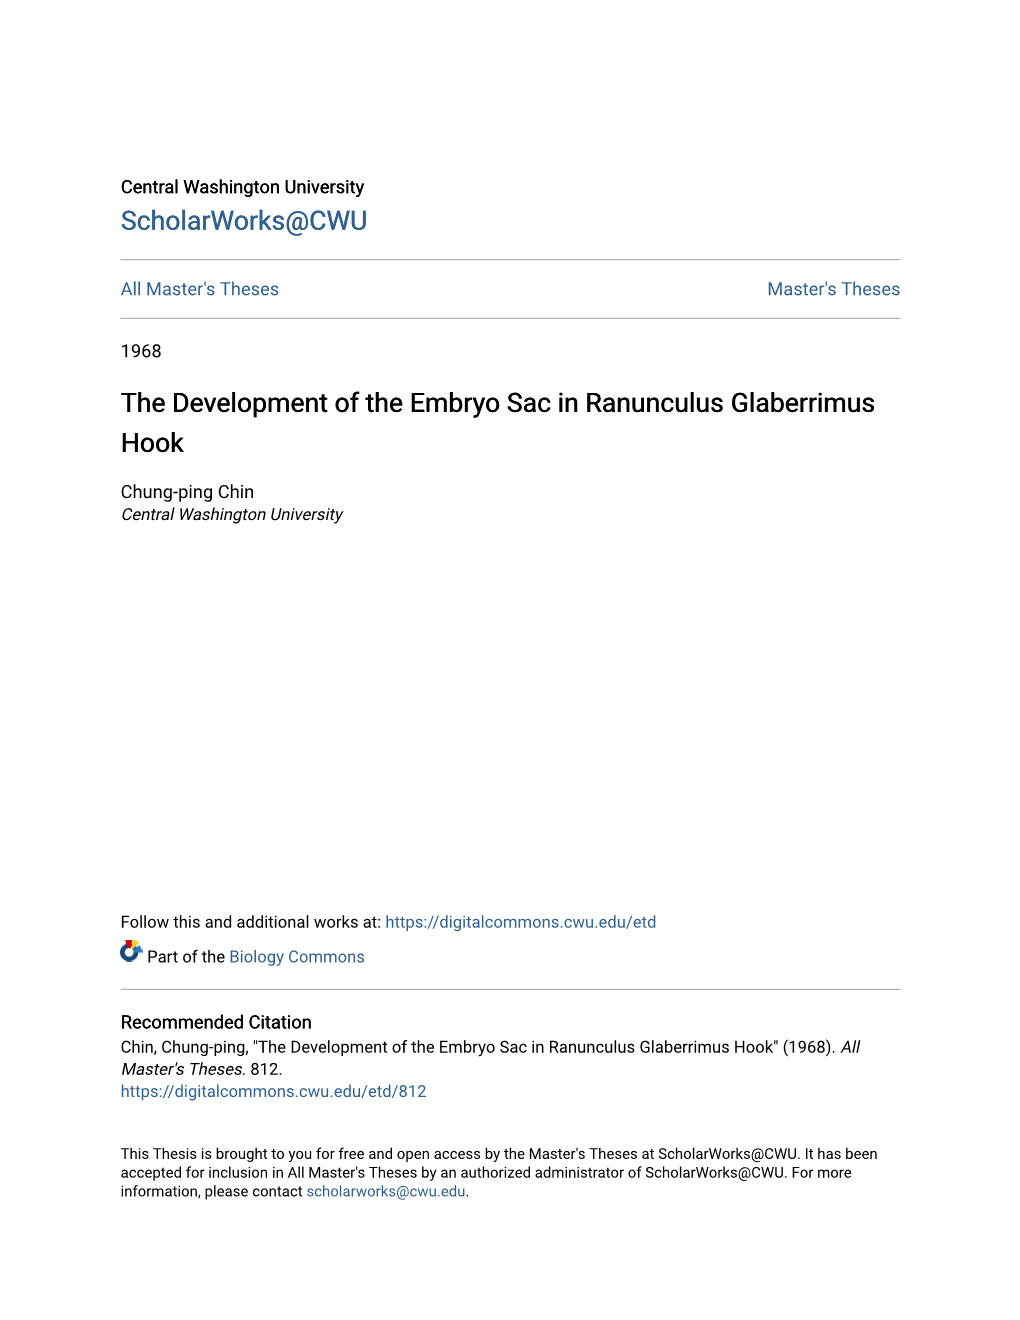 The Development of the Embryo Sac in Ranunculus Glaberrimus Hook